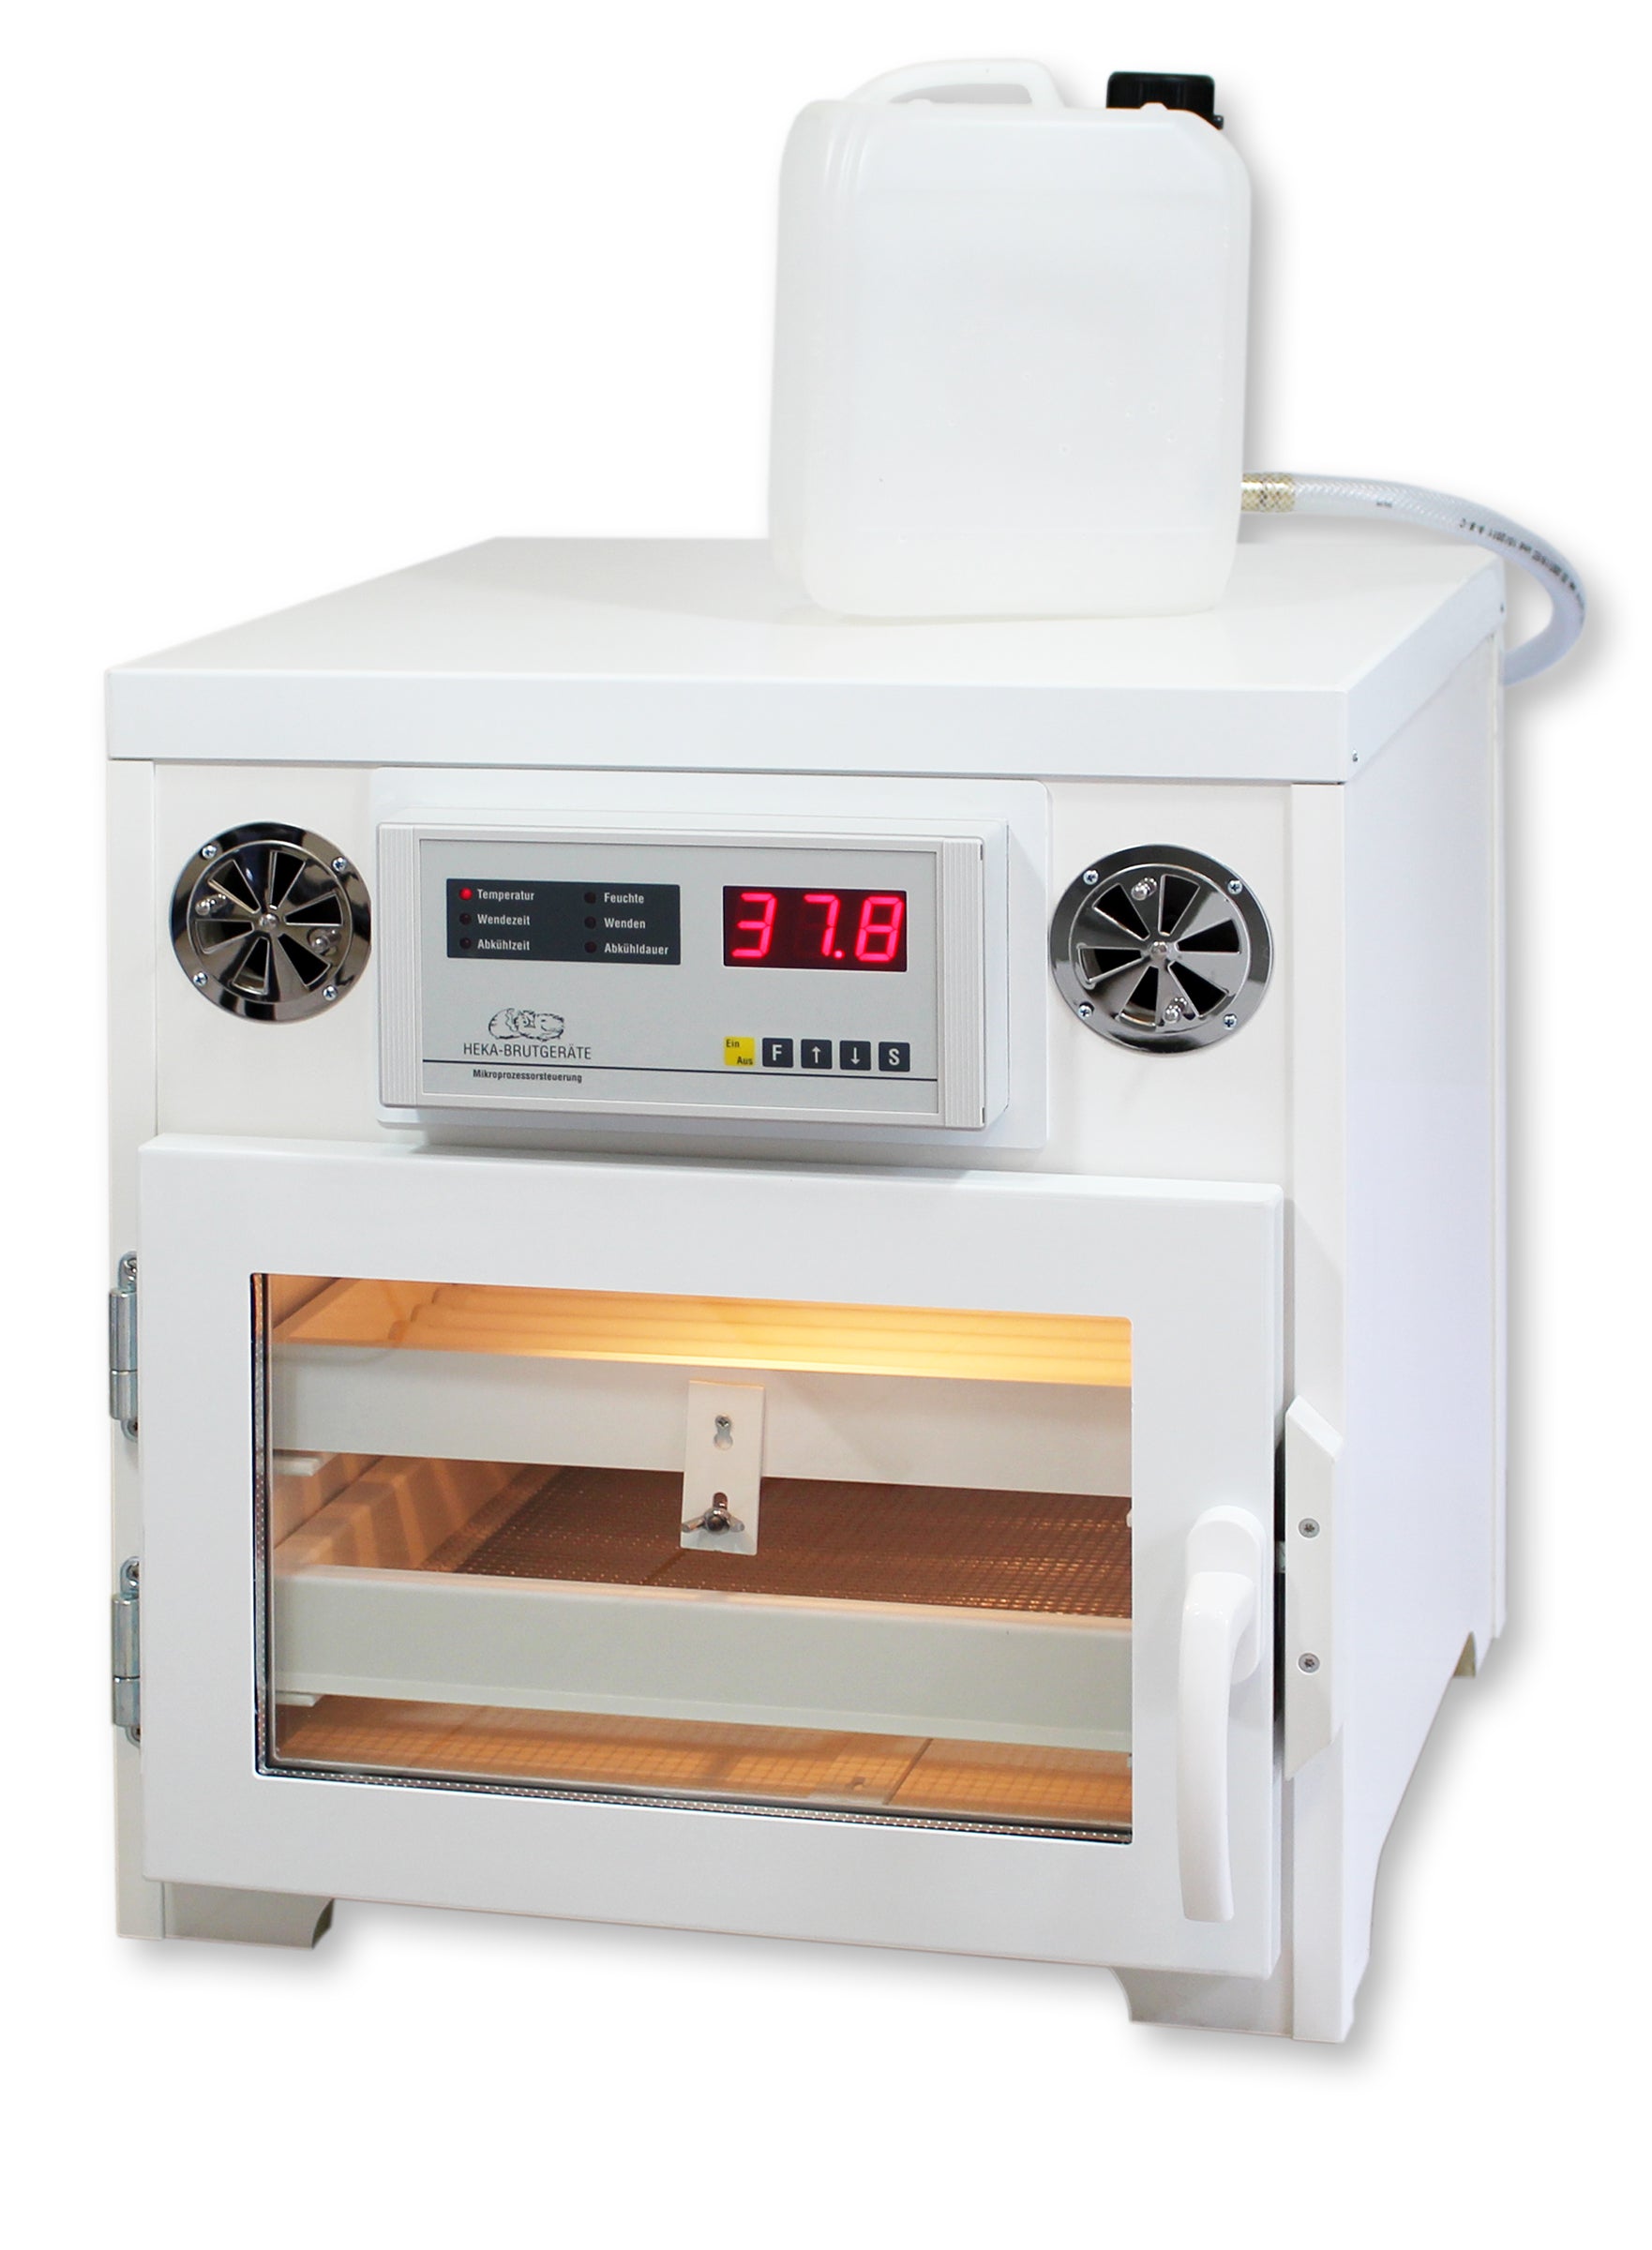 HEKA Parrot-Incubator "Kongo-Olymp" - with fully-automatic humidification